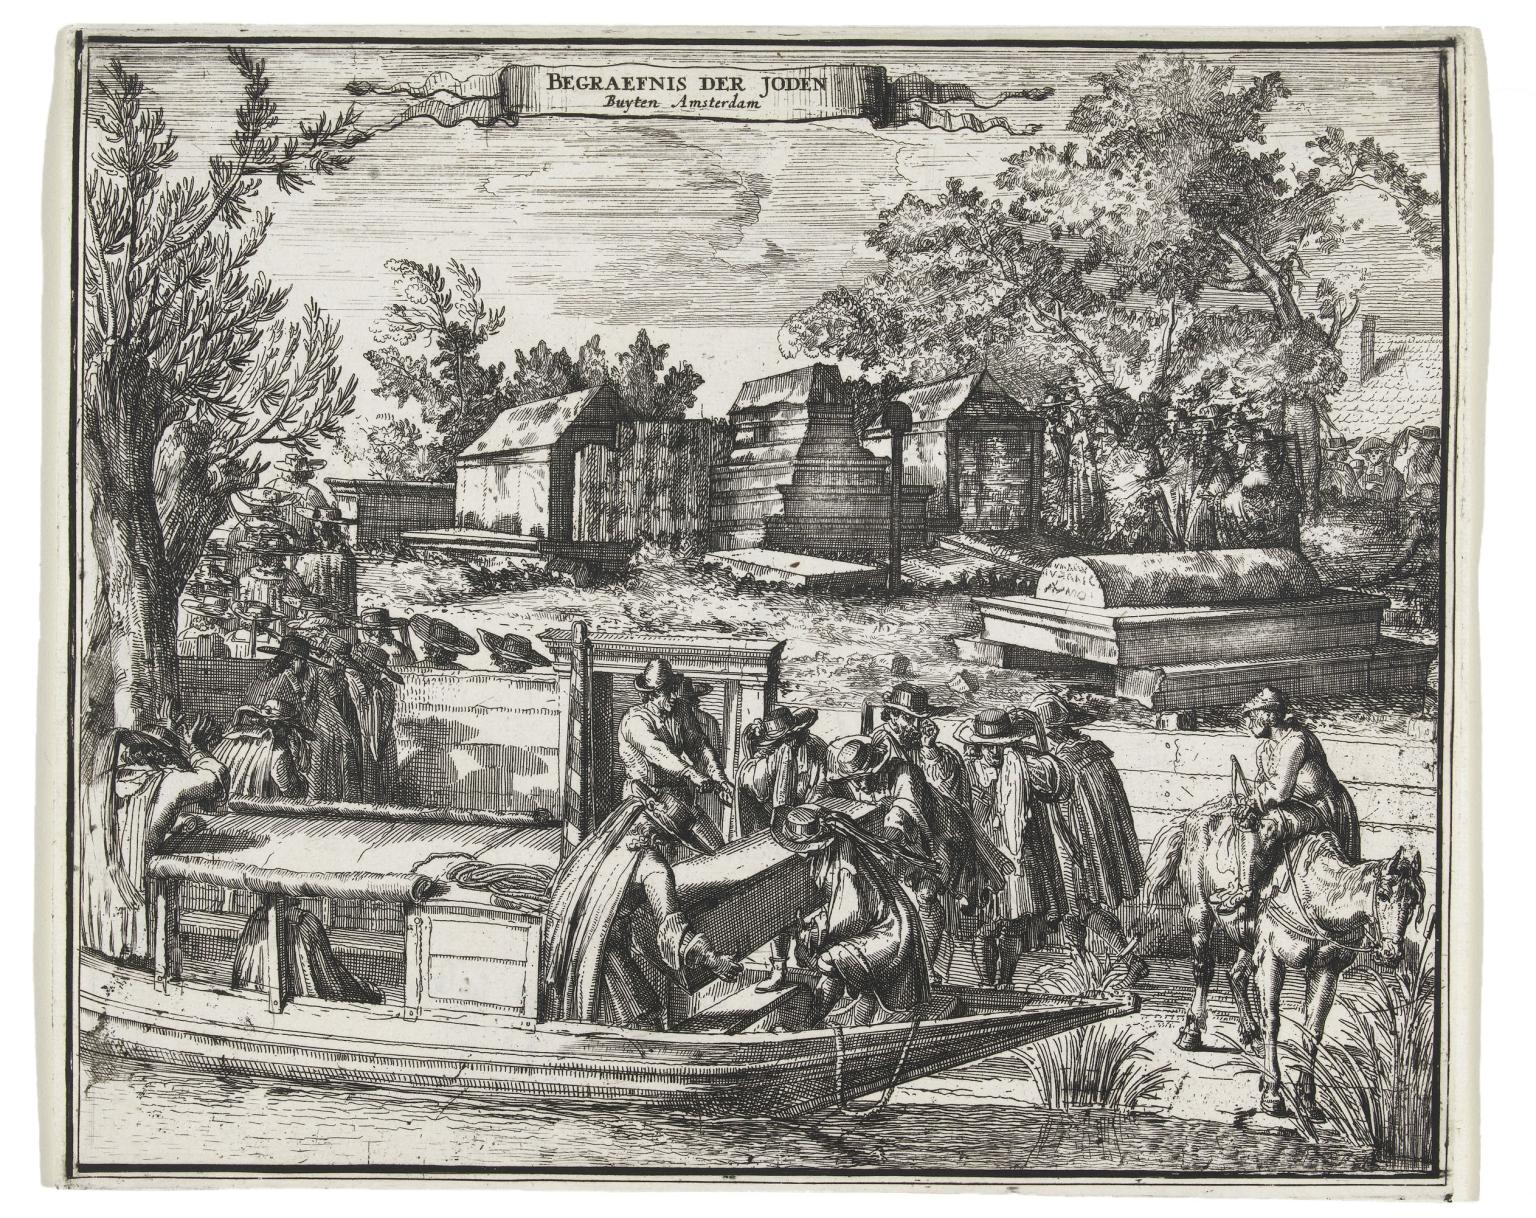 Print engraving of people on boat docking at a graveyard and lifting out a tomb. 